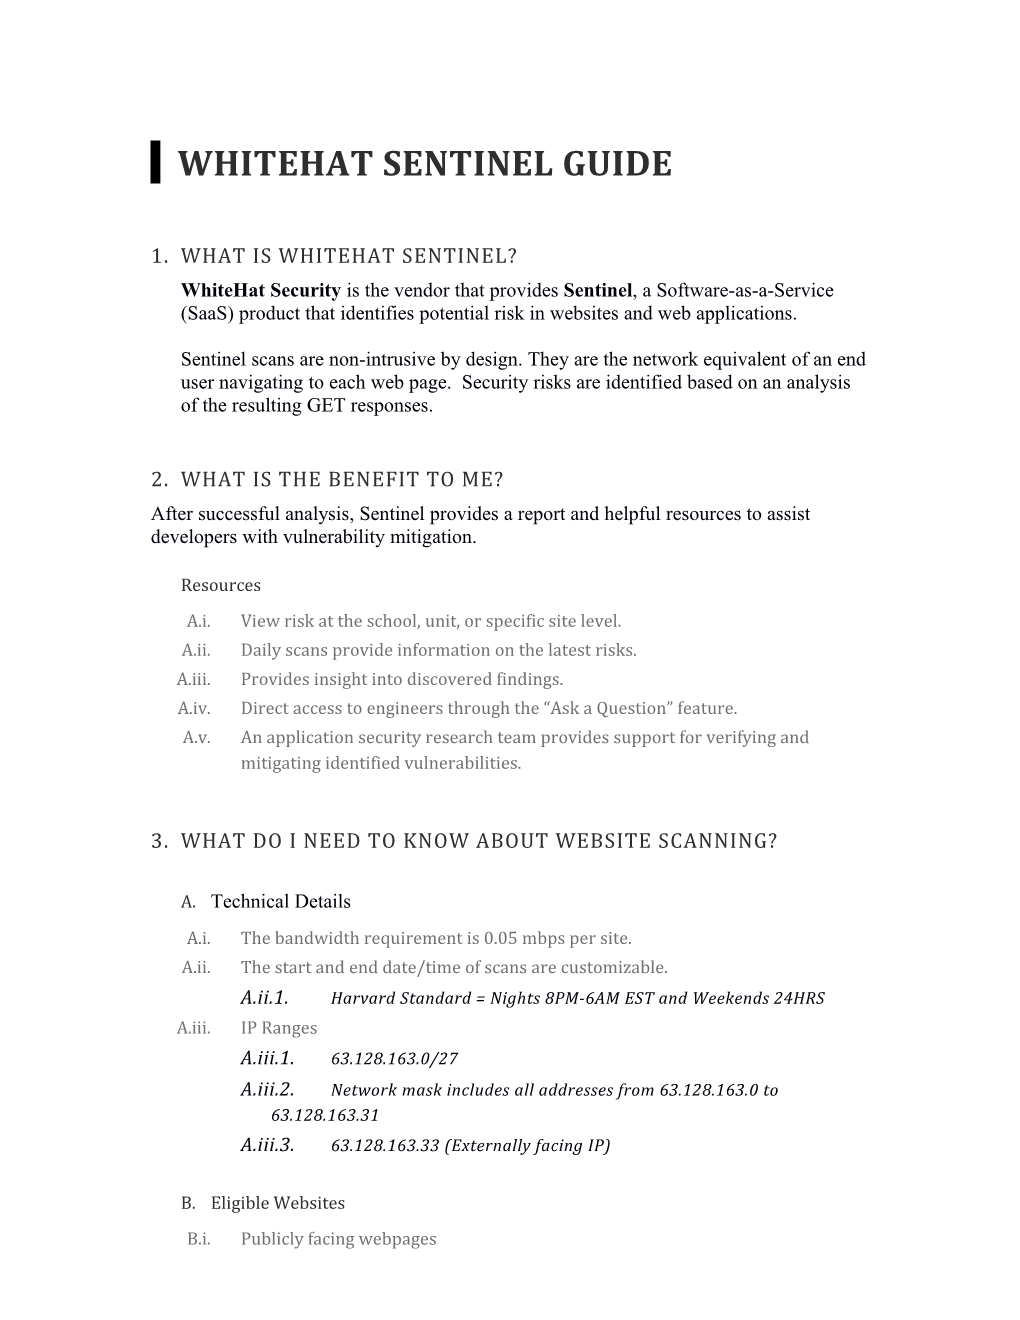 1.What IS WHITEHAT SENTINEL?